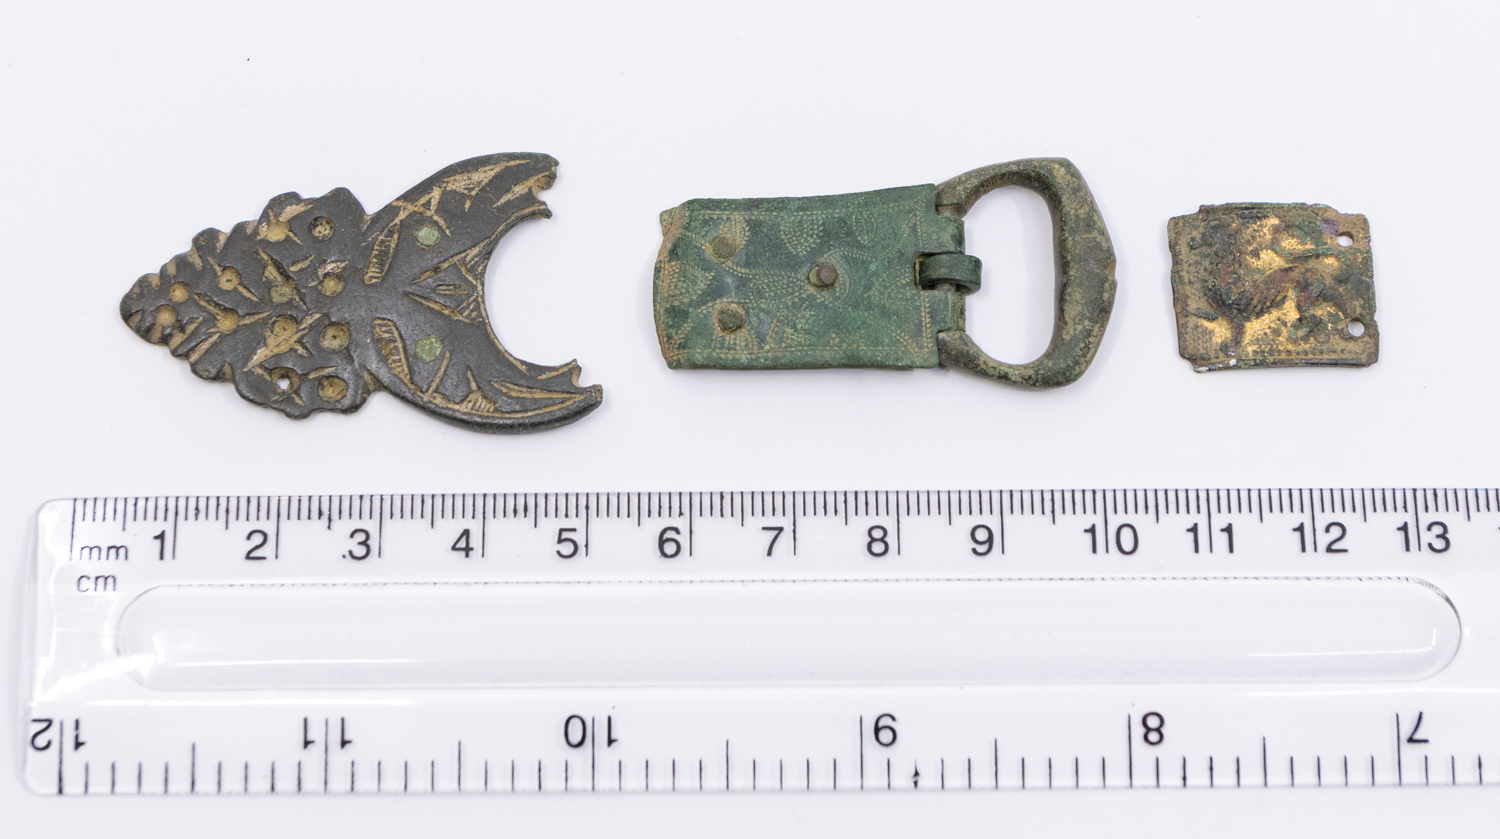 60Mixed lot containing a medieval buckle+plate. The buckle plate has a beautiful deep green patina